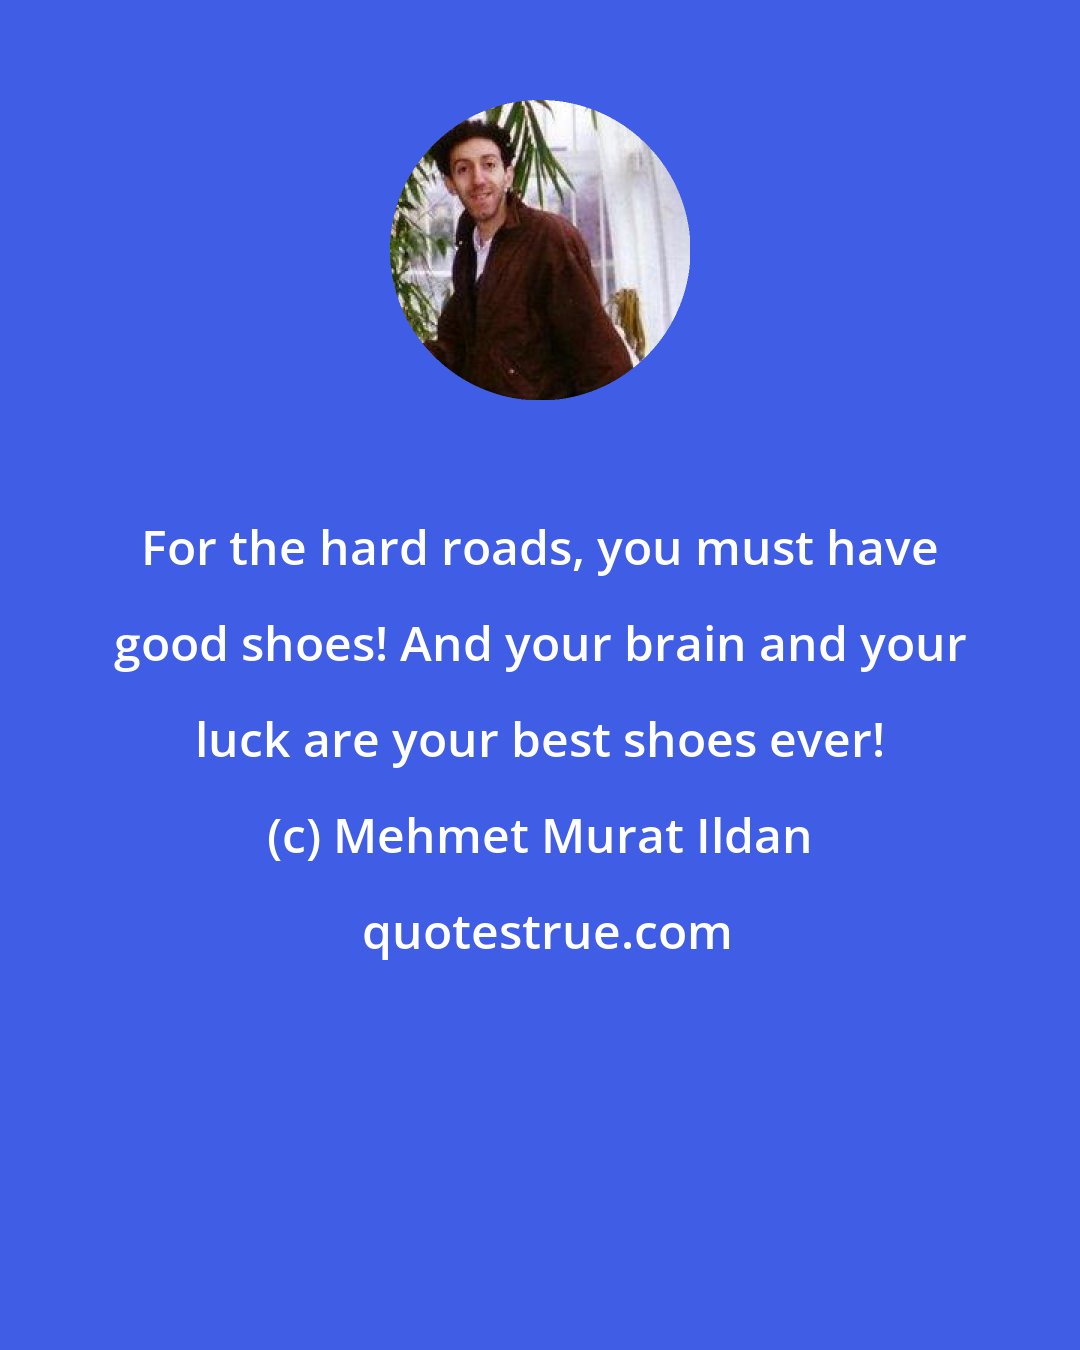 Mehmet Murat Ildan: For the hard roads, you must have good shoes! And your brain and your luck are your best shoes ever!